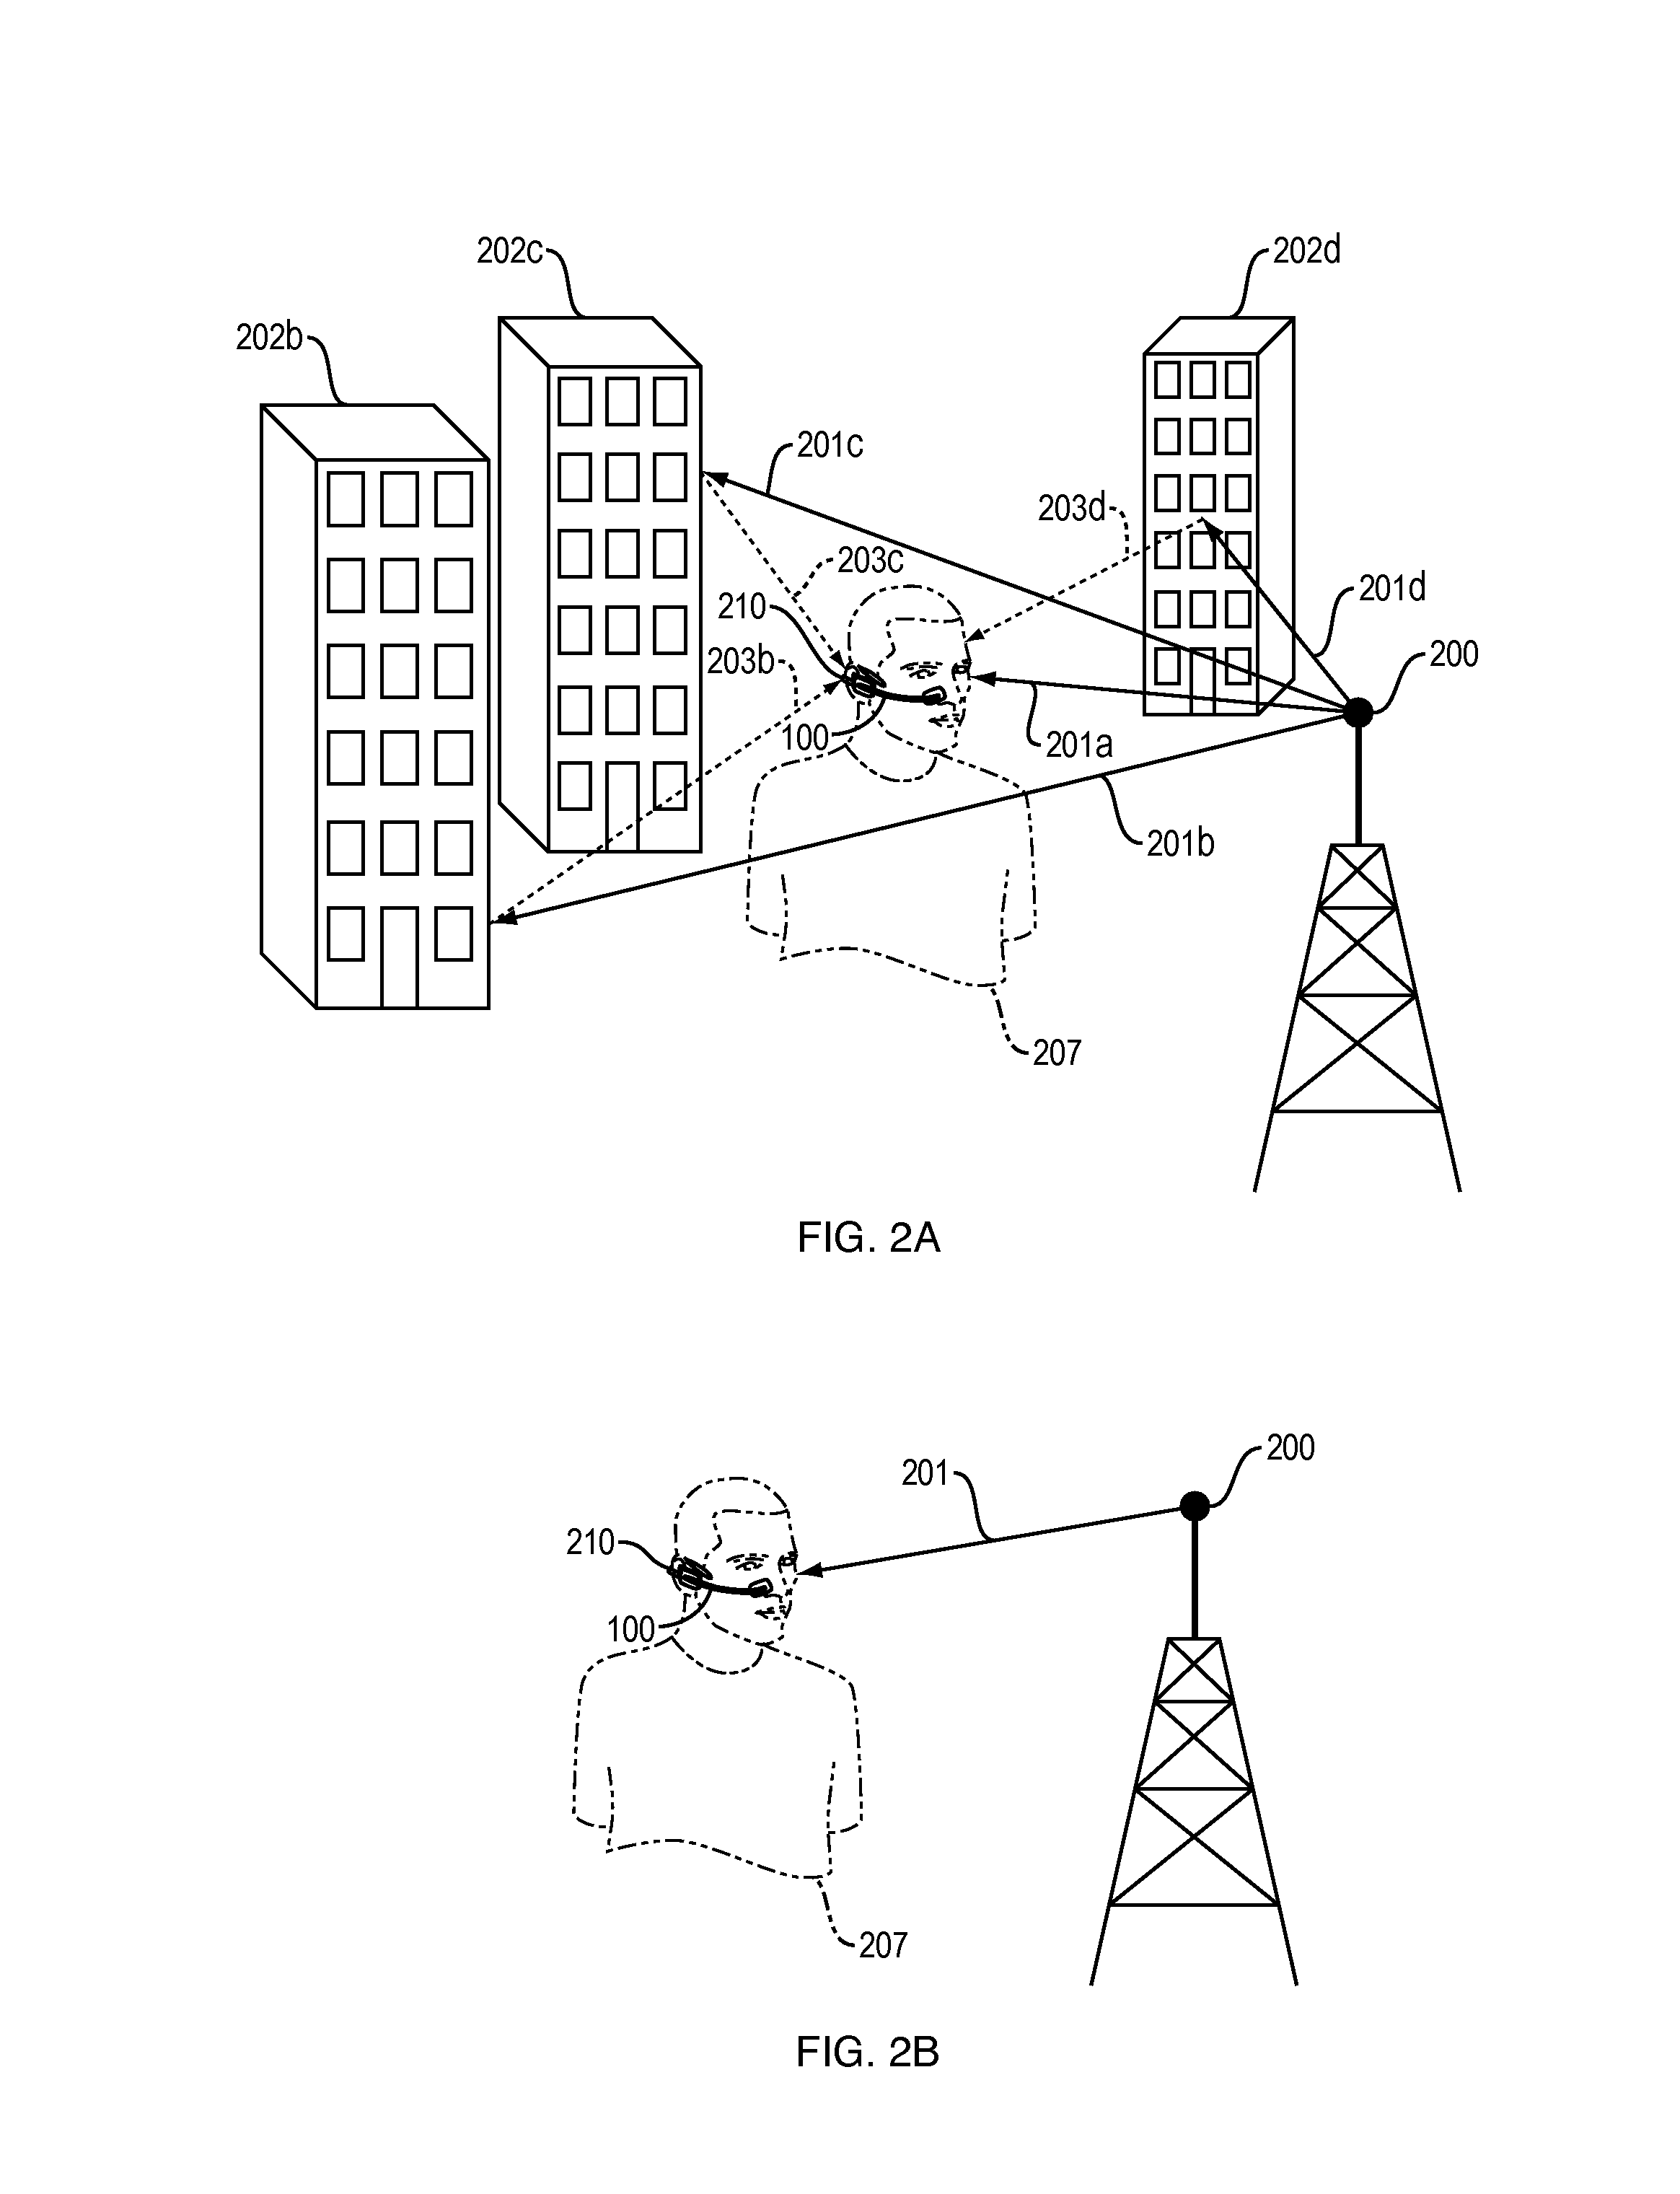 Spatially diverse antennas for a headset computer